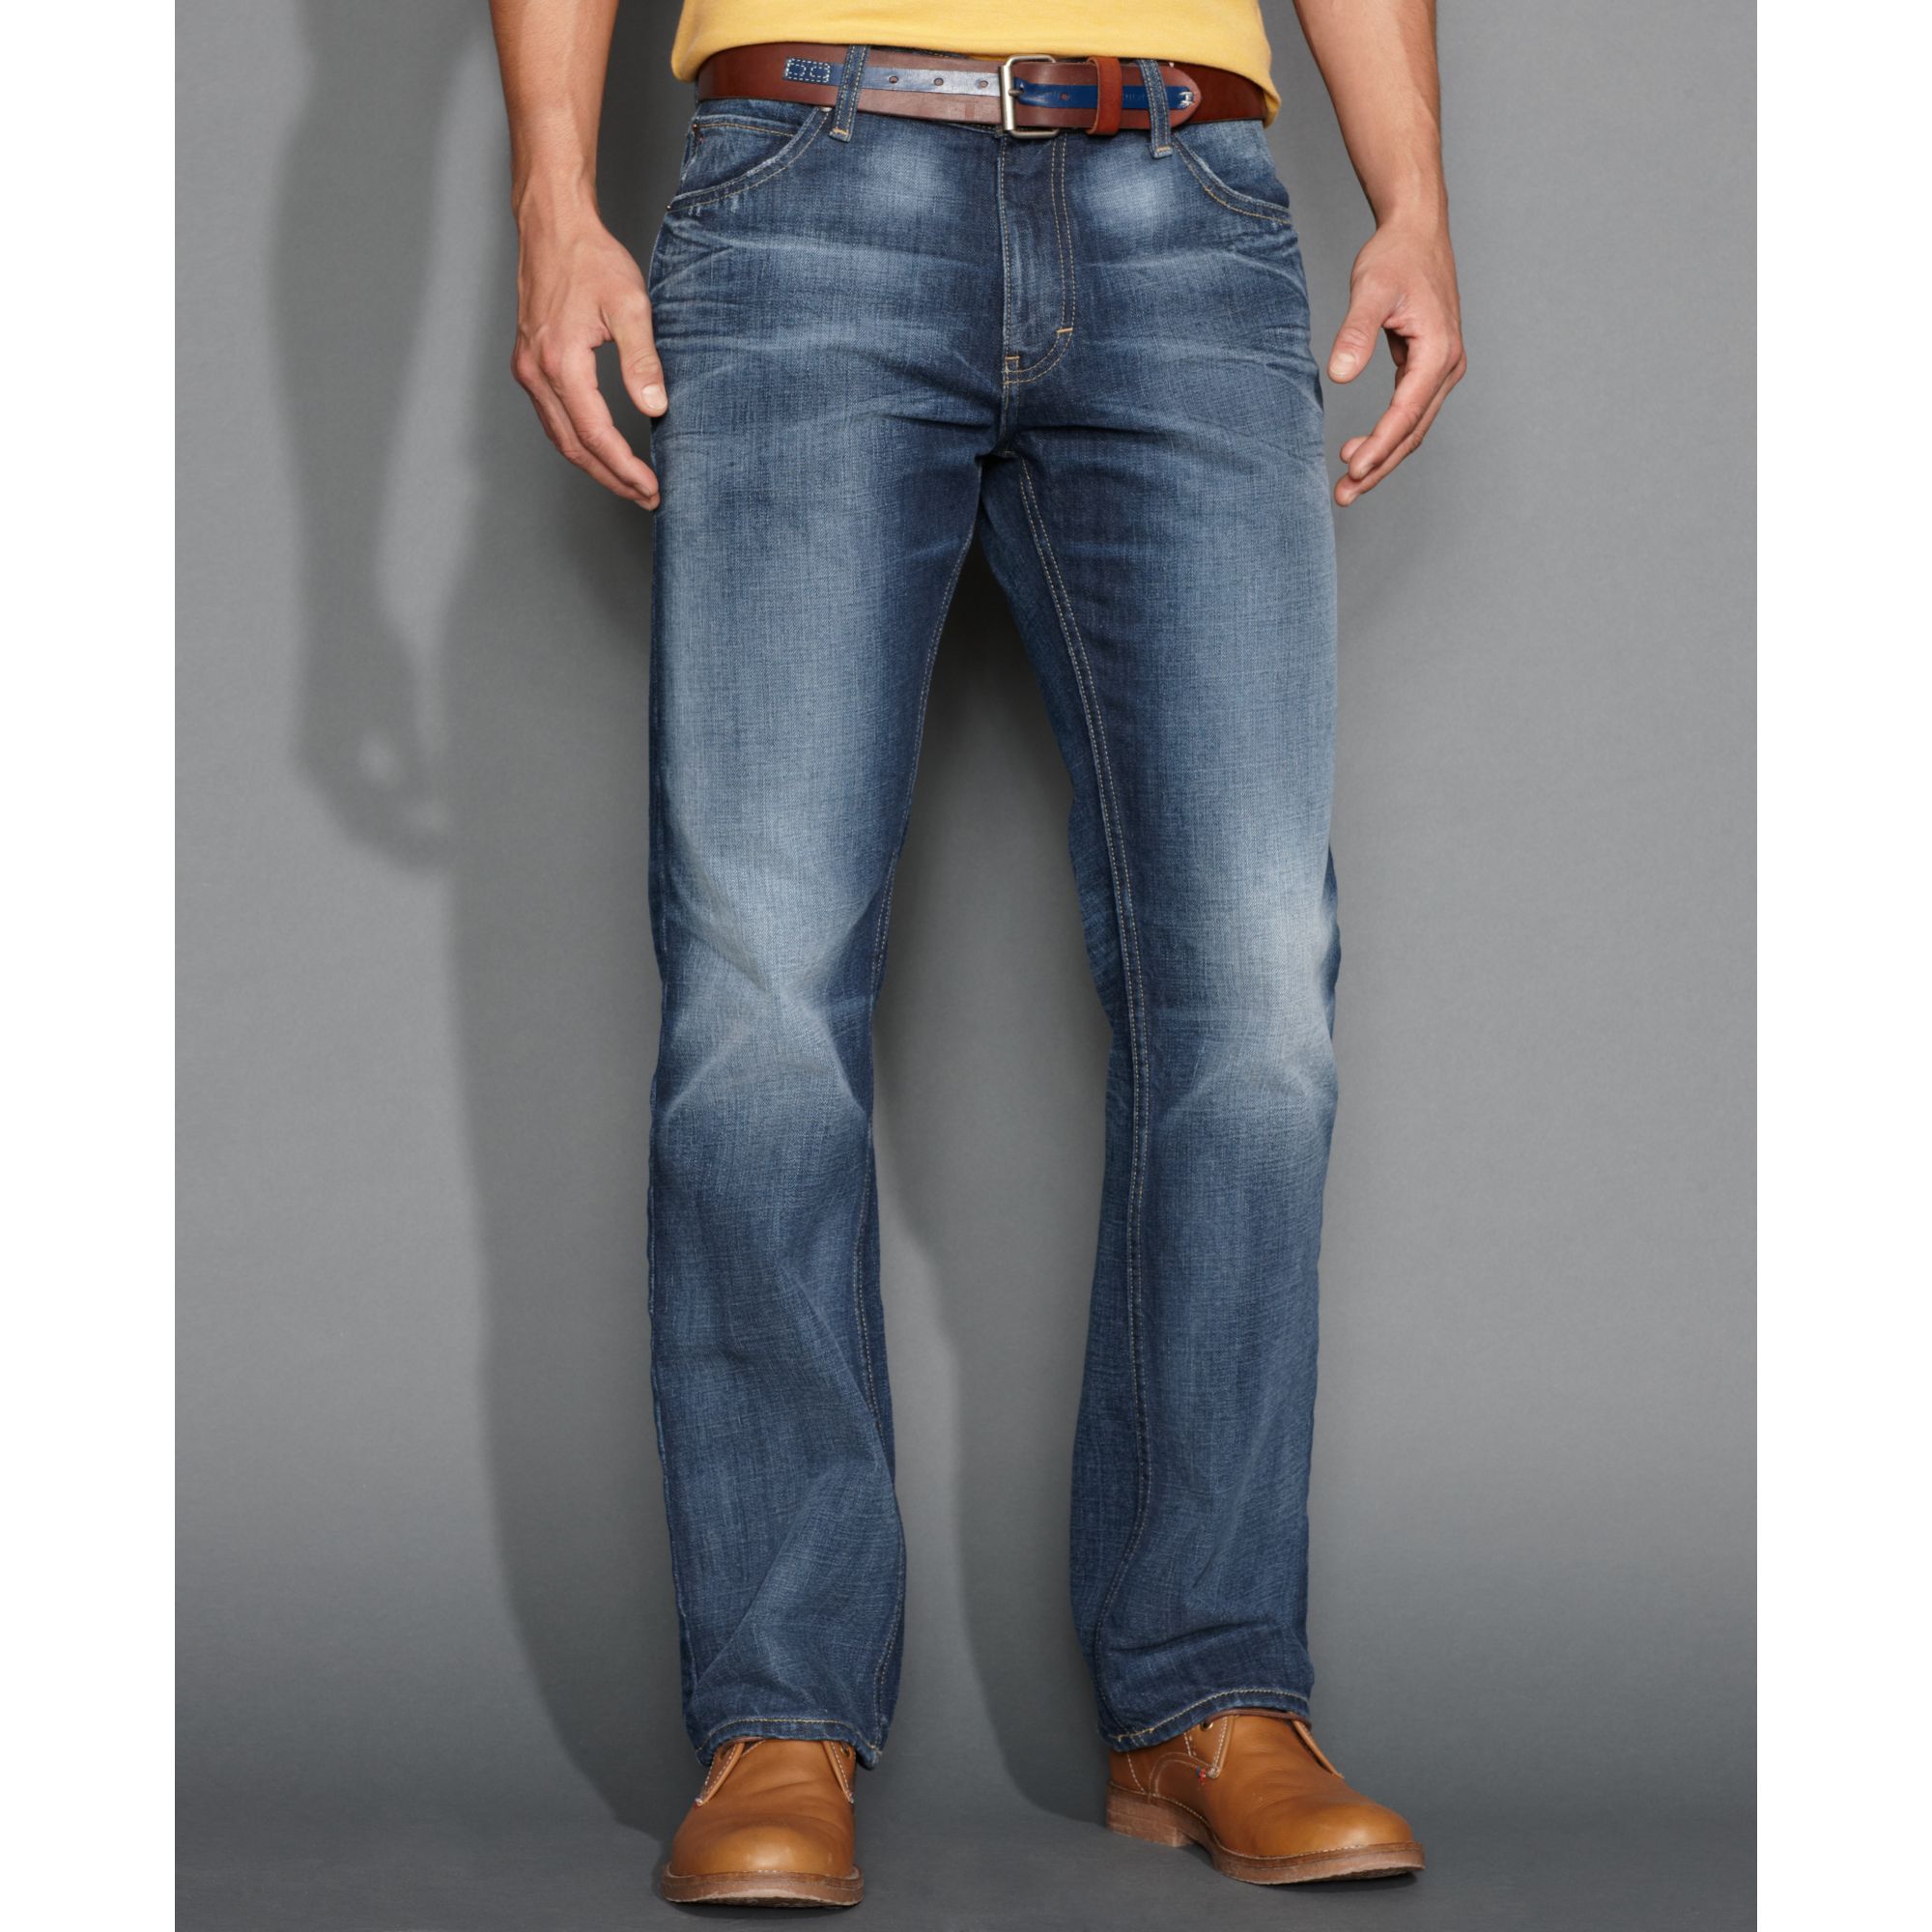 tommy hilfiger jeans bootcut